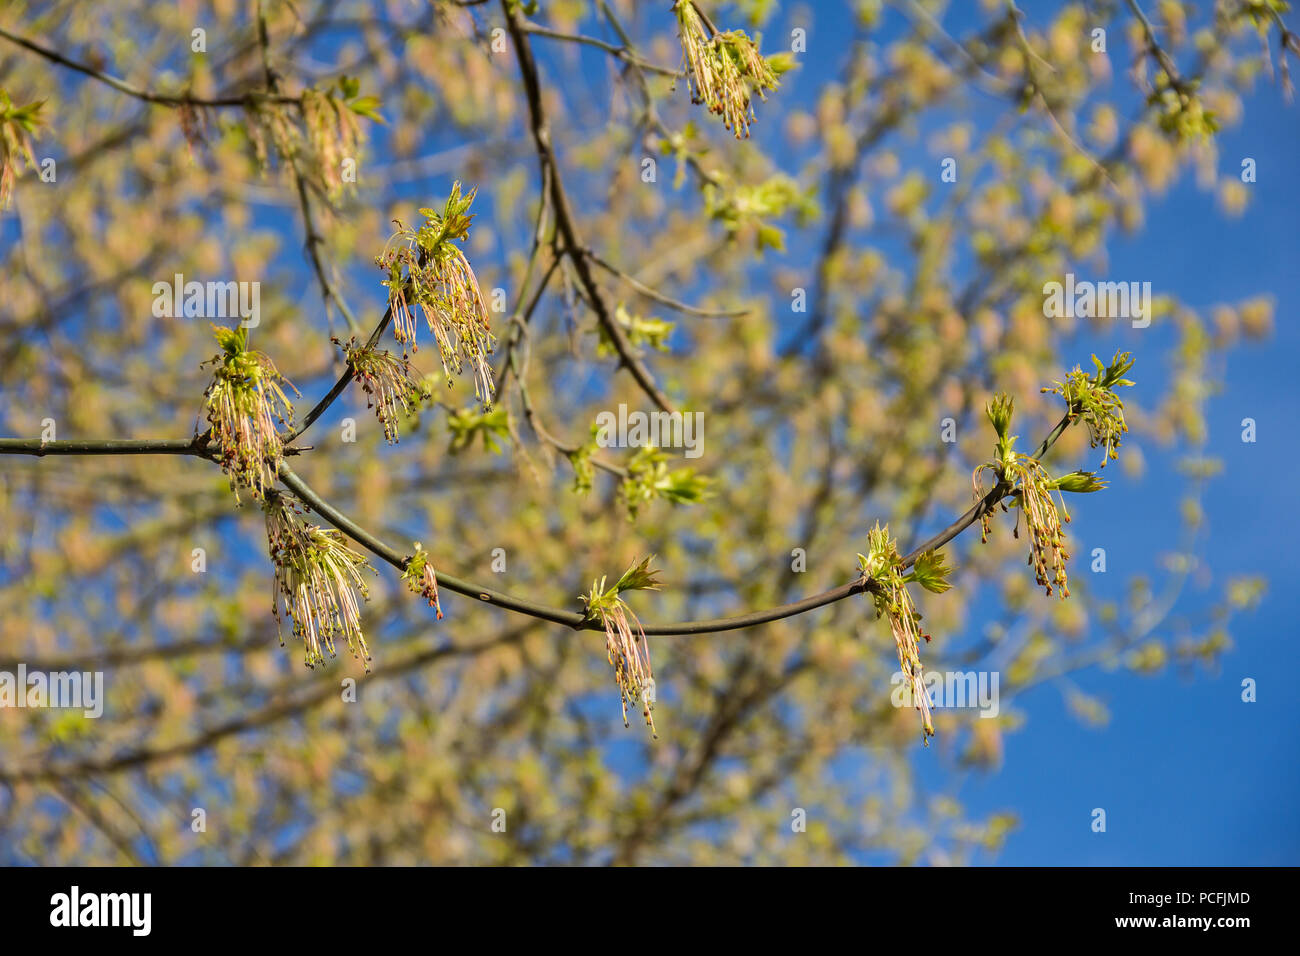 Spring blossoming of the ash-leaved maple tree, Acer negundo, close up shot against blurry branches and sky background Stock Photo